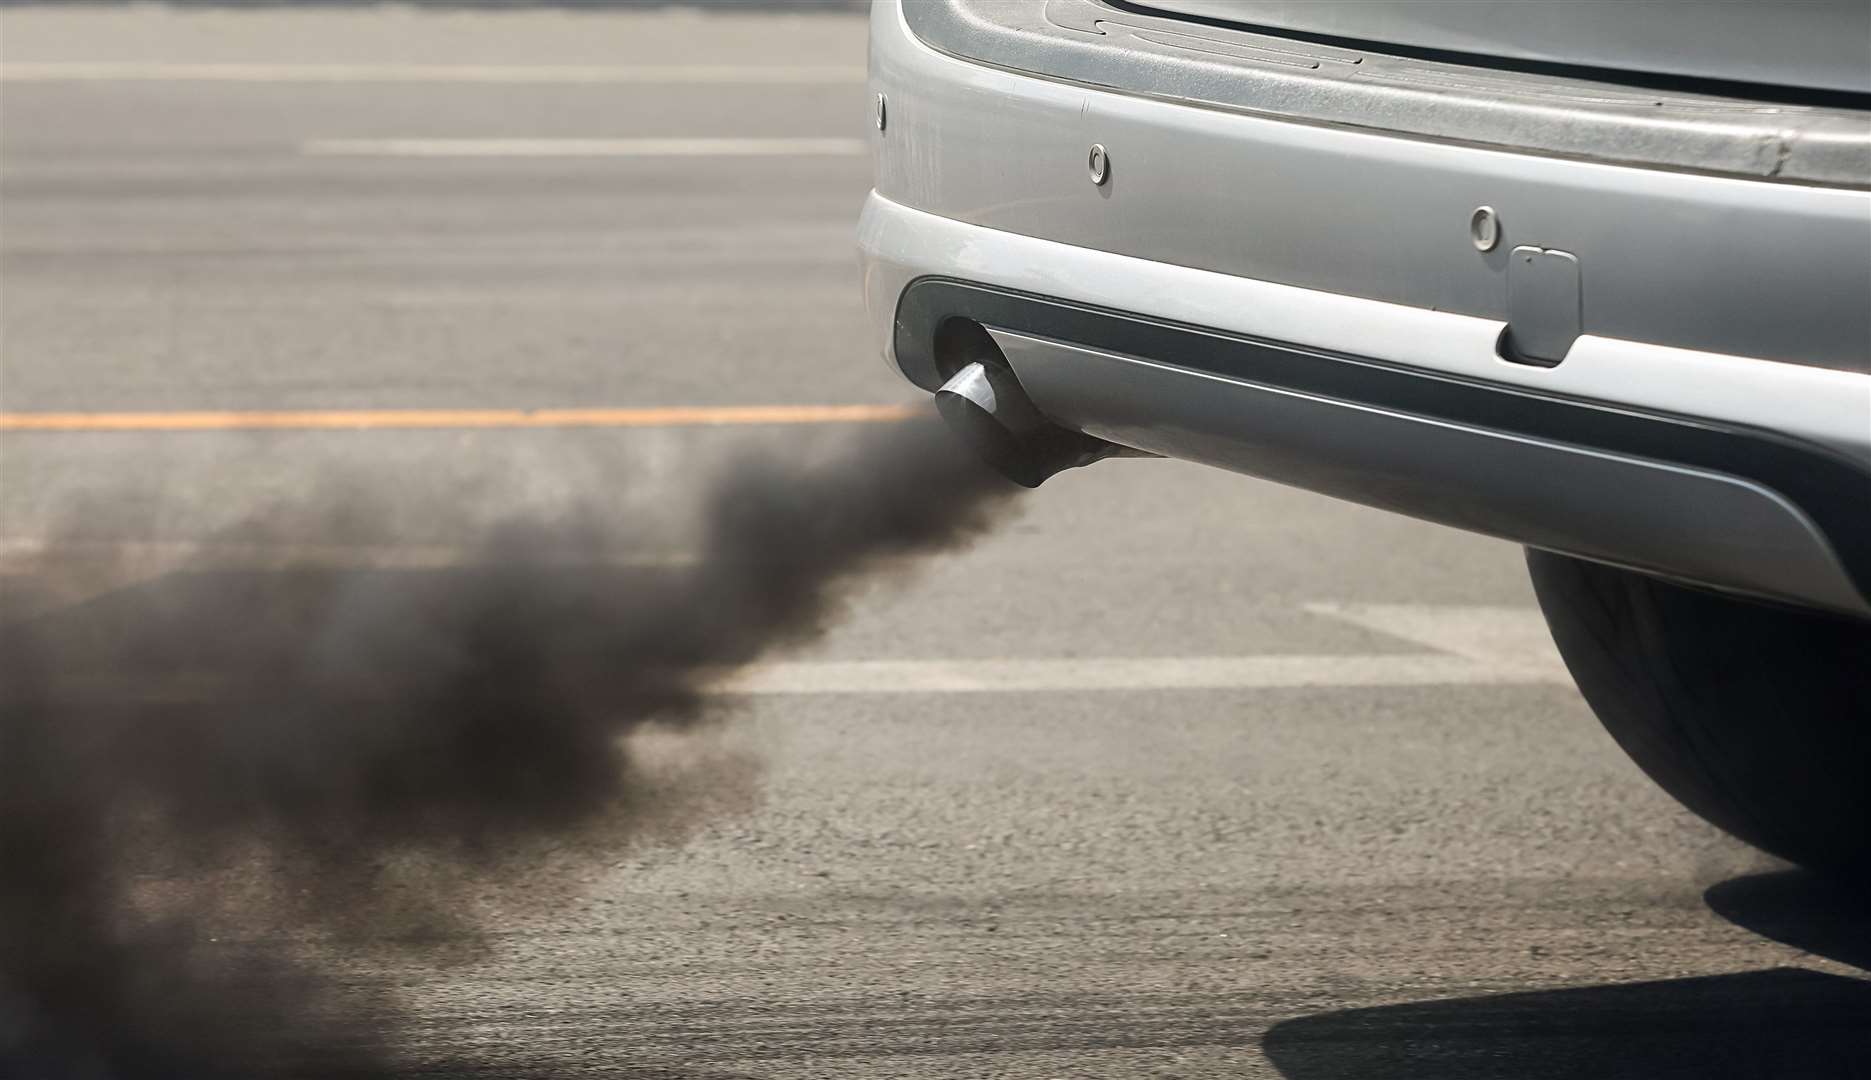 Air pollution from vehicle exhaust pipe on road. Stock image: iStock